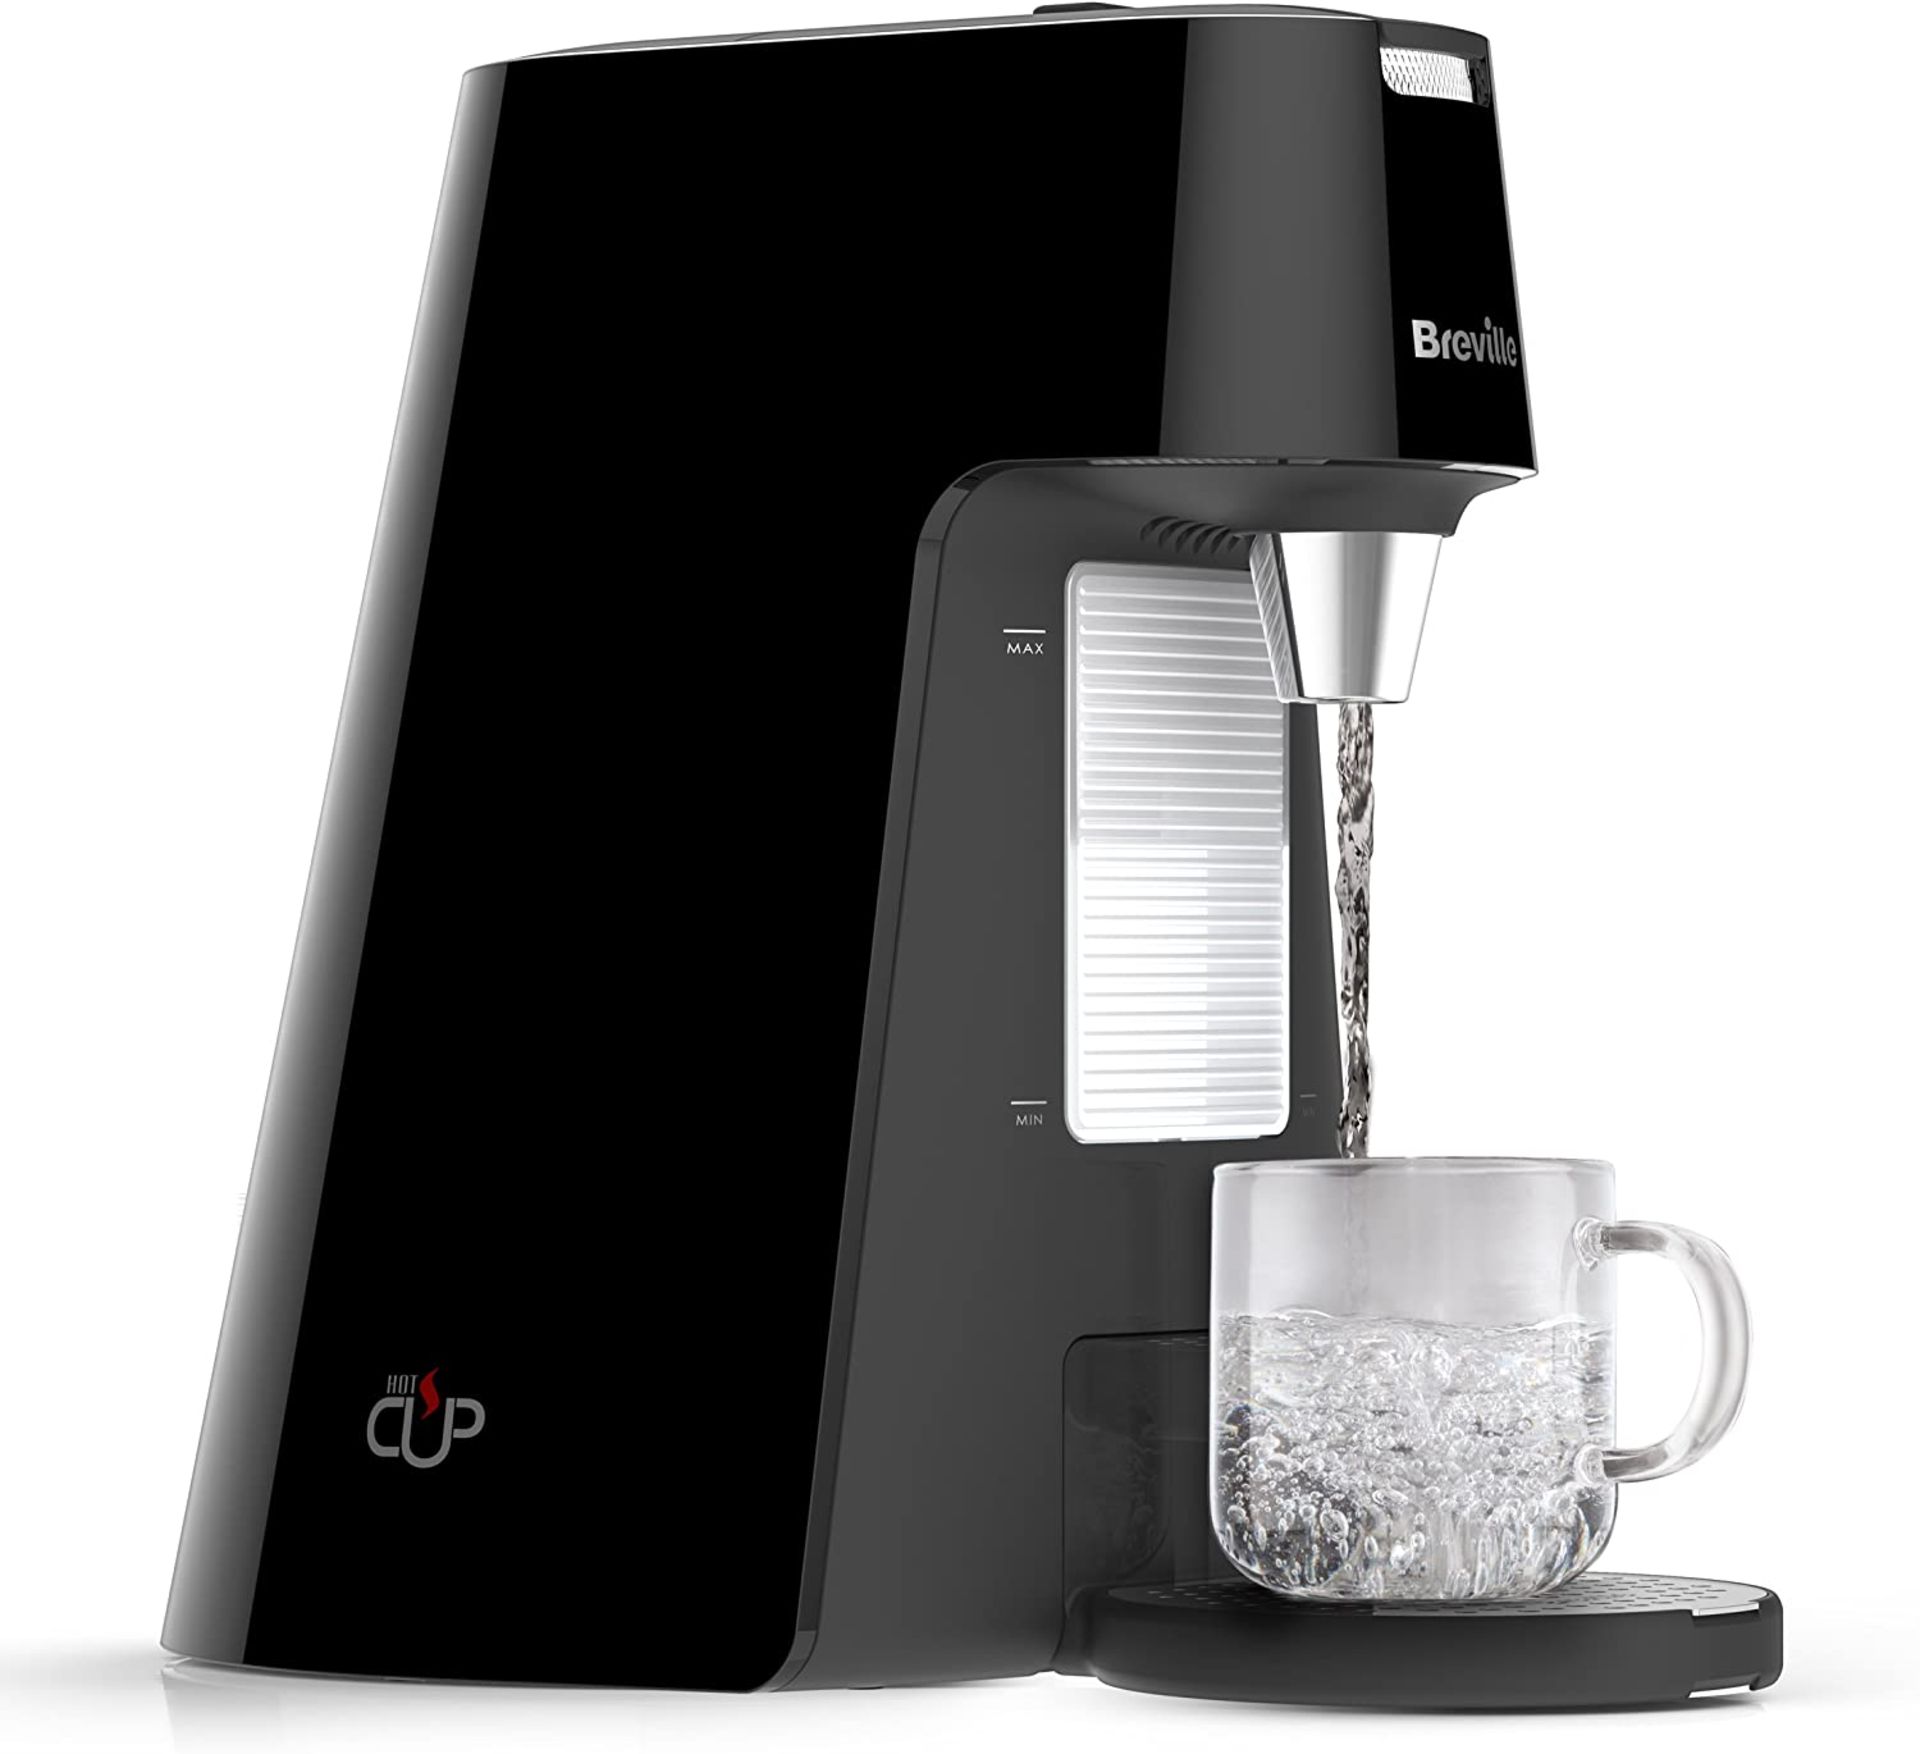 Breville VKT124 HotCup Hot Water Dispenser, 3 KW Fast Boil, Adjustable Cup Height, 1.7 Litres, Gloss